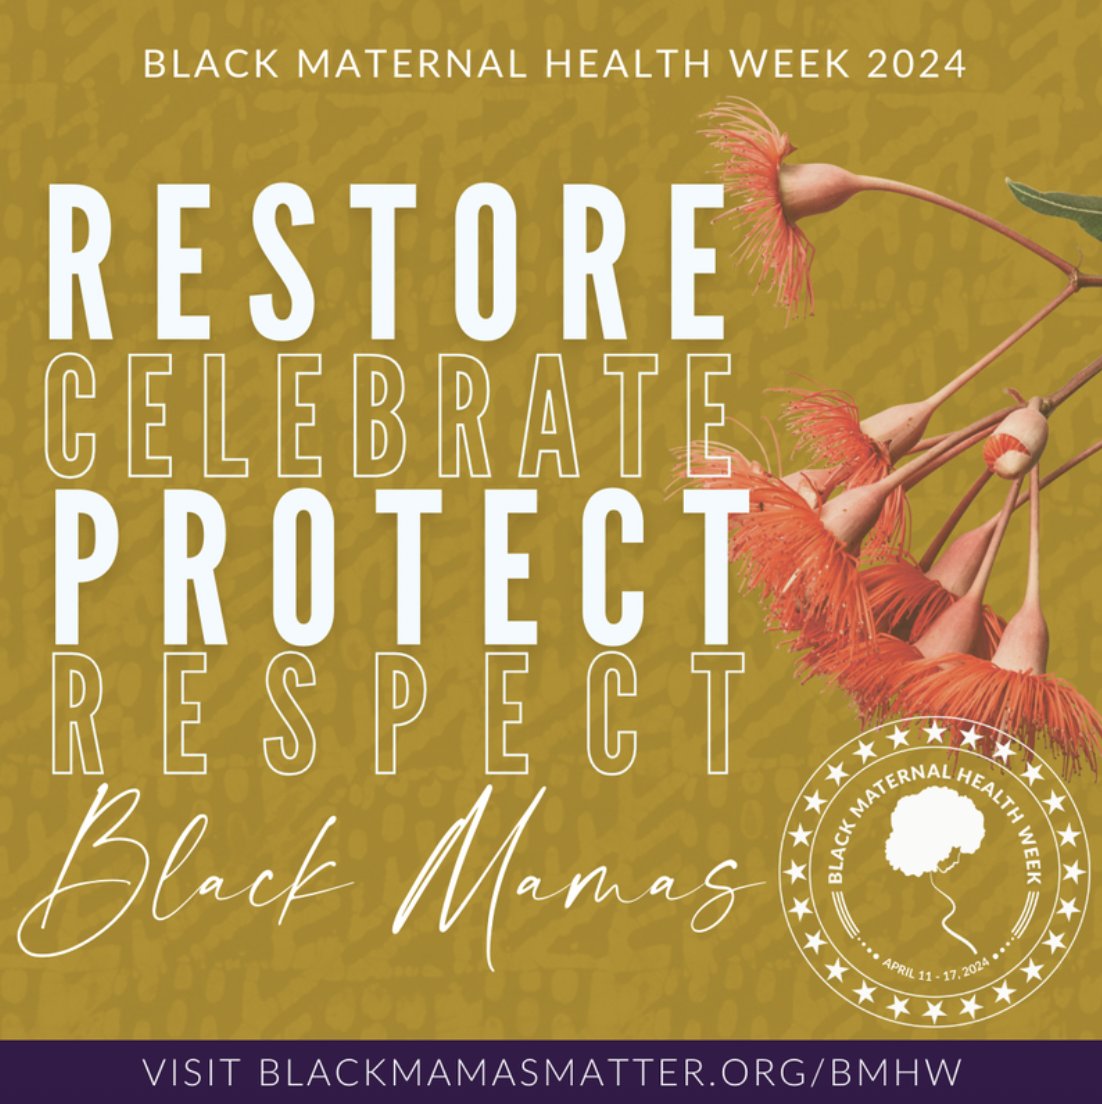 Abortion Access Front is joining @BlkMamasMatter to celebrate Black Maternal Health Week! Join us in centering maternity care work, and advocacy. This year's theme is “Our Bodies STILL Belong to Us: Reproductive Justice NOW” Learn more! #BlackMamasMatter blackmamasmatter.org/bmhw